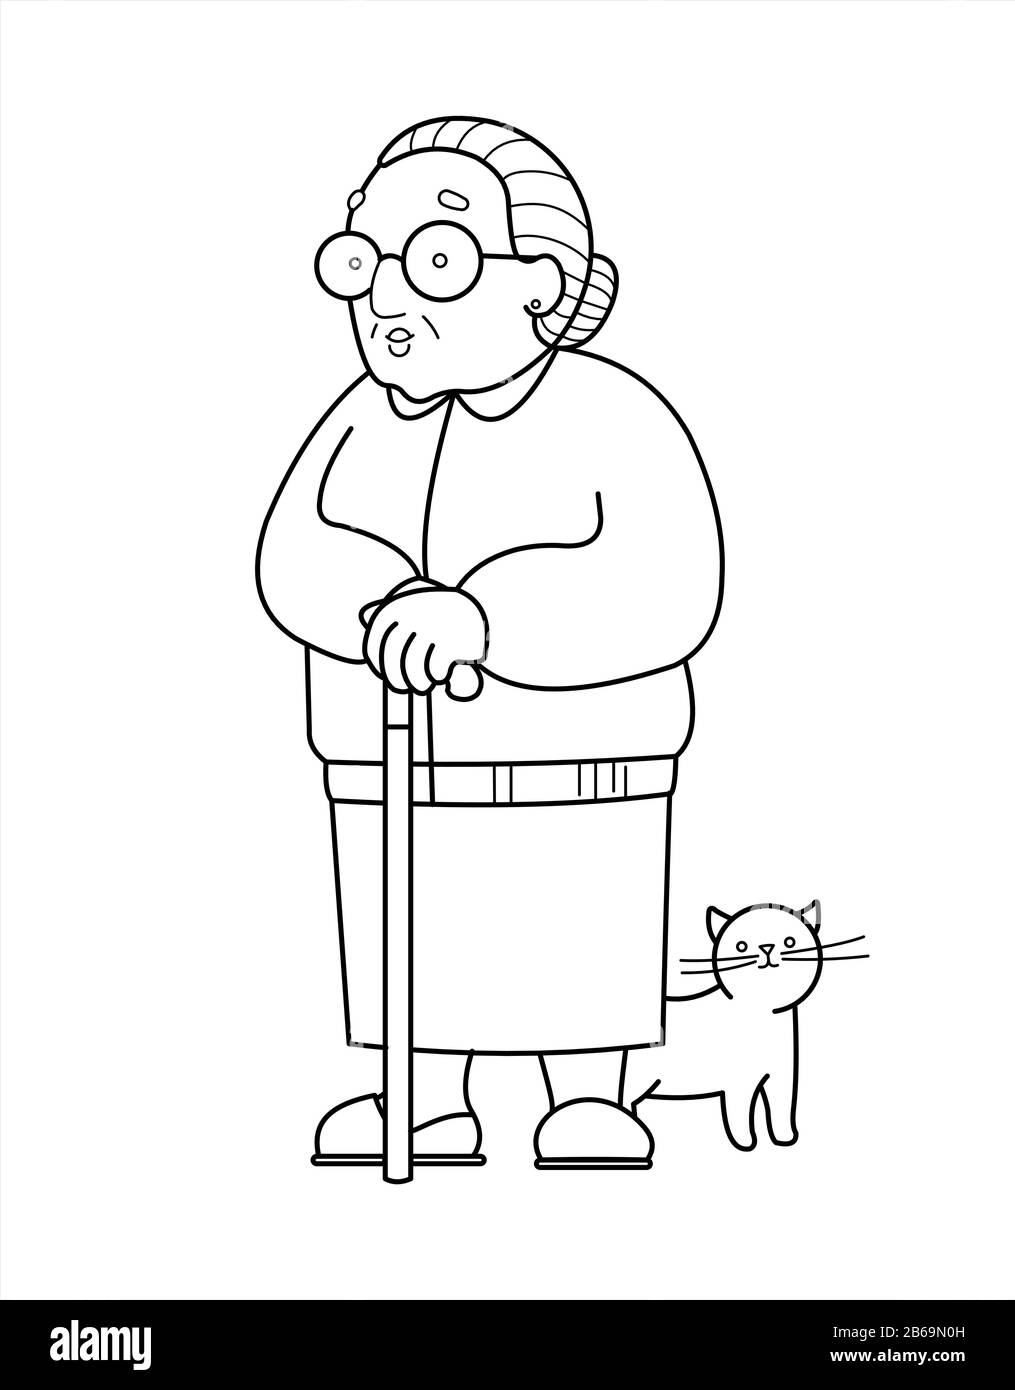 Vector contour Image Of An Old Woman With Glasses And With A Cane. Good Old Grandmother With A Red Cute Cat. Elderly Woman, Senile People Concept. Iso Stock Vector